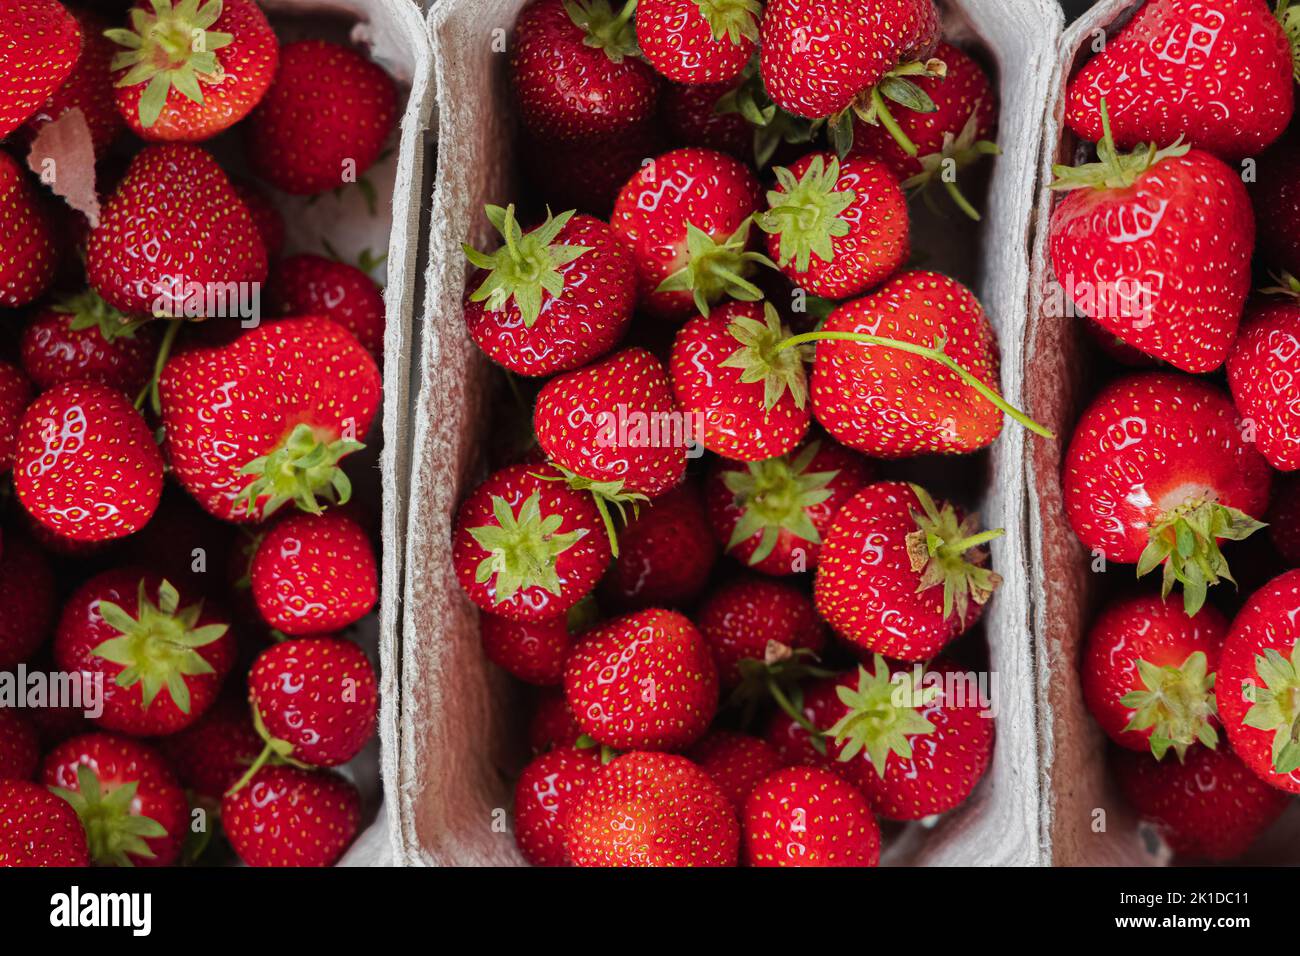 Colourful, organic, freshly picked red strawberries on display in trays at an outdoor rural country farmer's market in Scotland, UK. Stock Photo